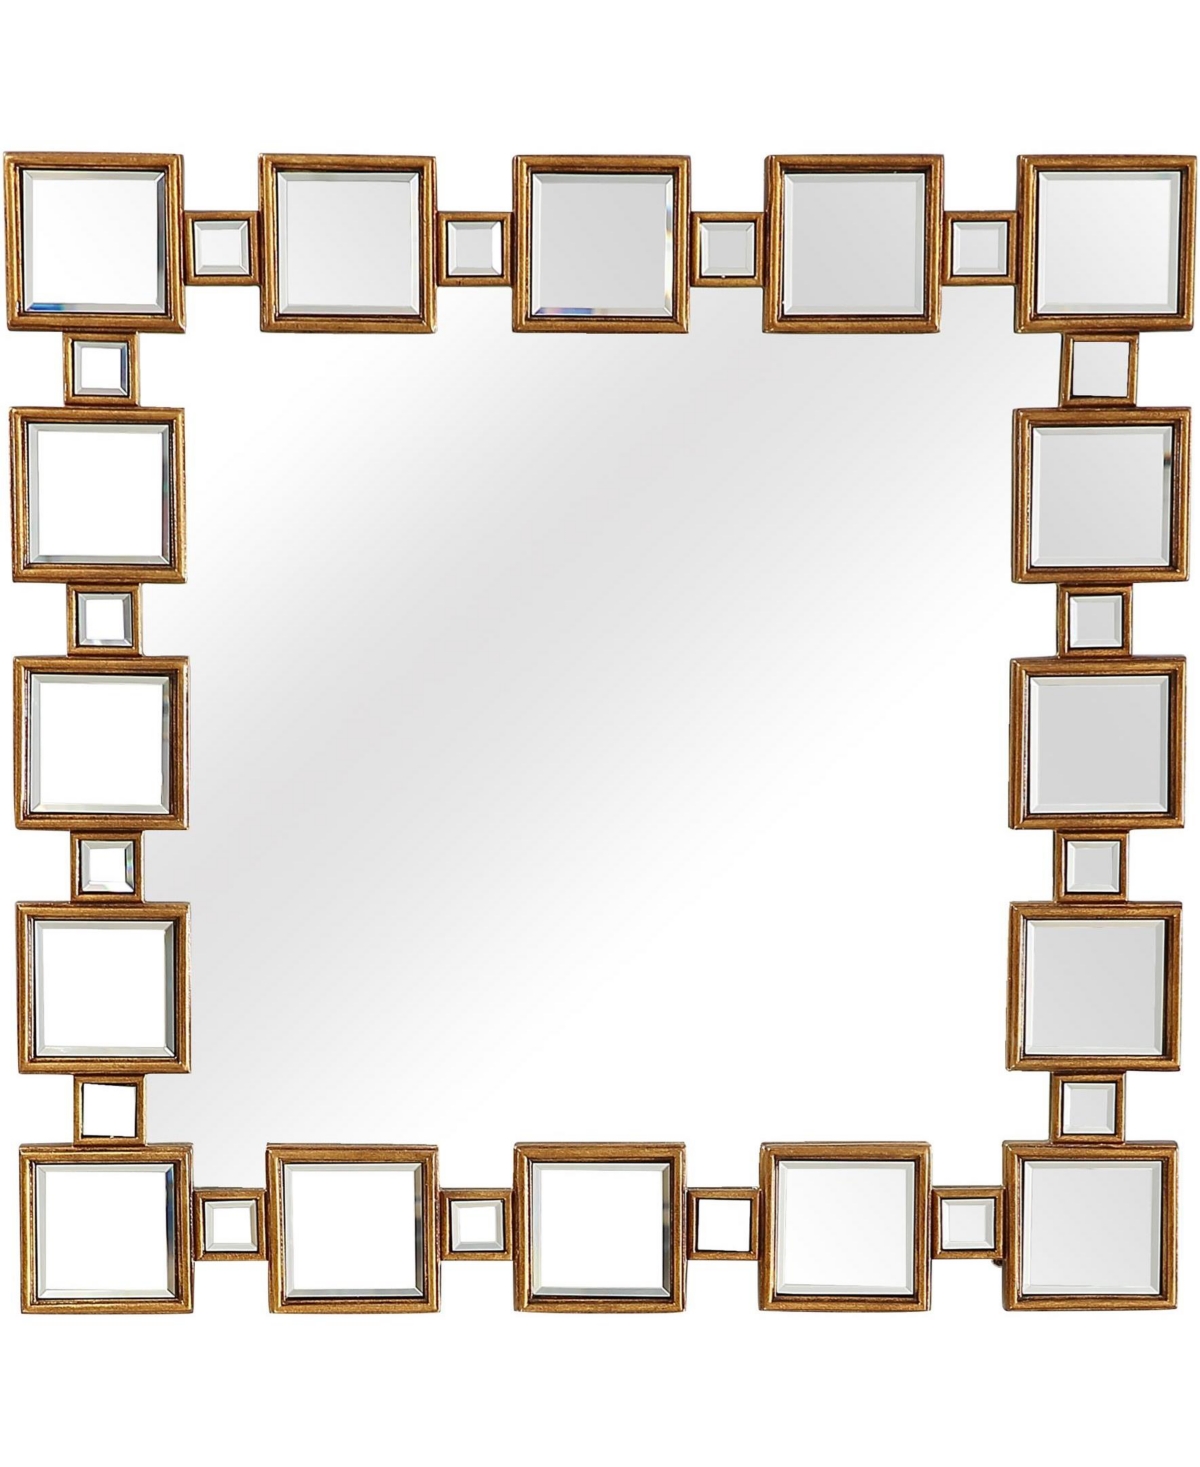 Orion Wall Mirror - Antique Gold-Tone